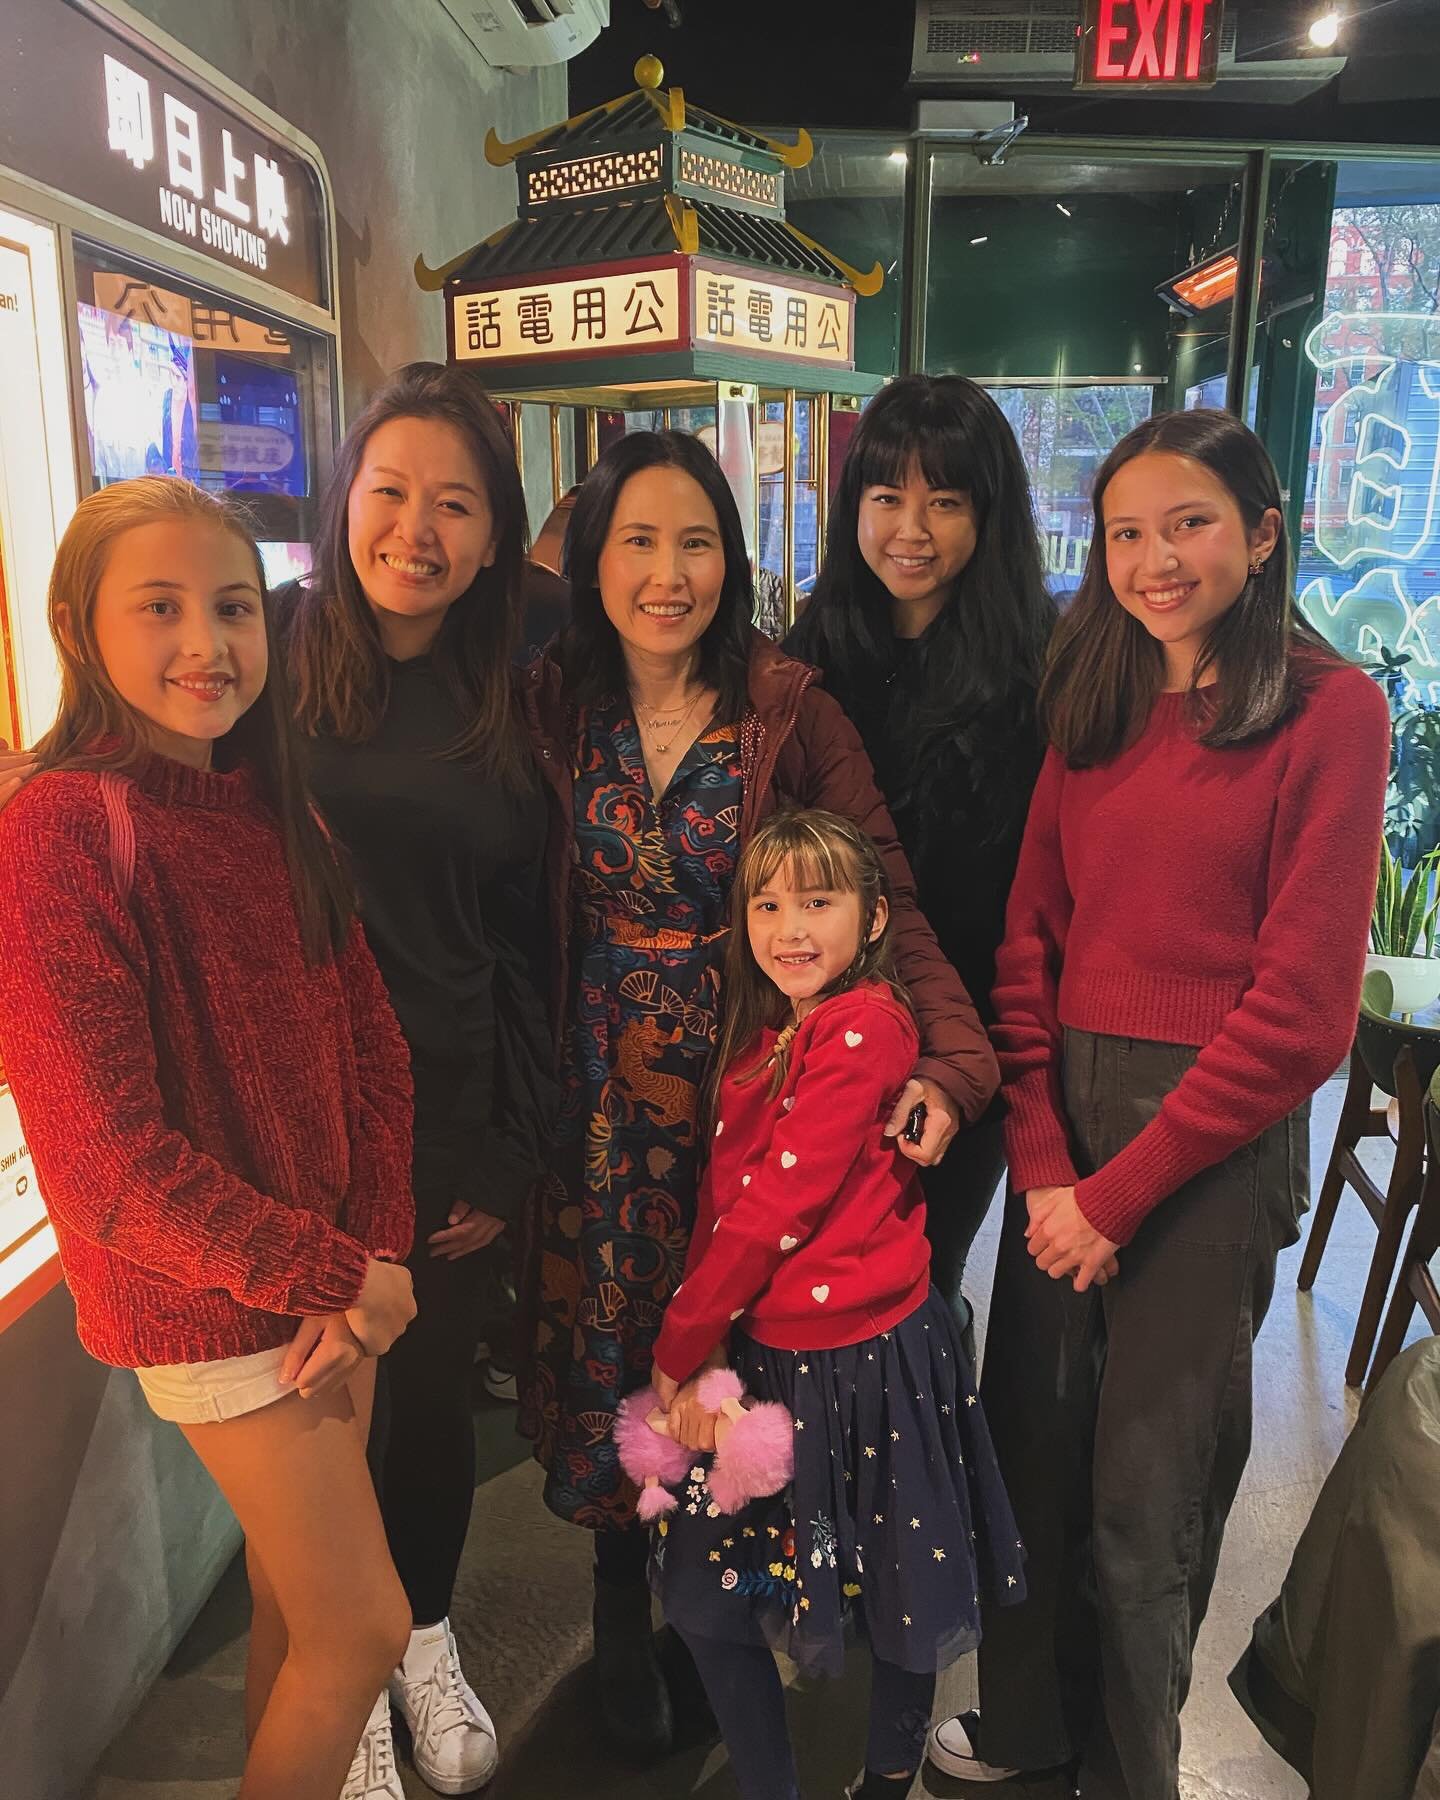 Ladies night at @potluckclubny - the food was so good we ate before the camera. 10/10 vibe, food and staff plus fun drinks too. Definitely look for the peep hole. Bonus- we ran into @miss_hailan from @saigonsocialnyc, another amazing Asian owned rest